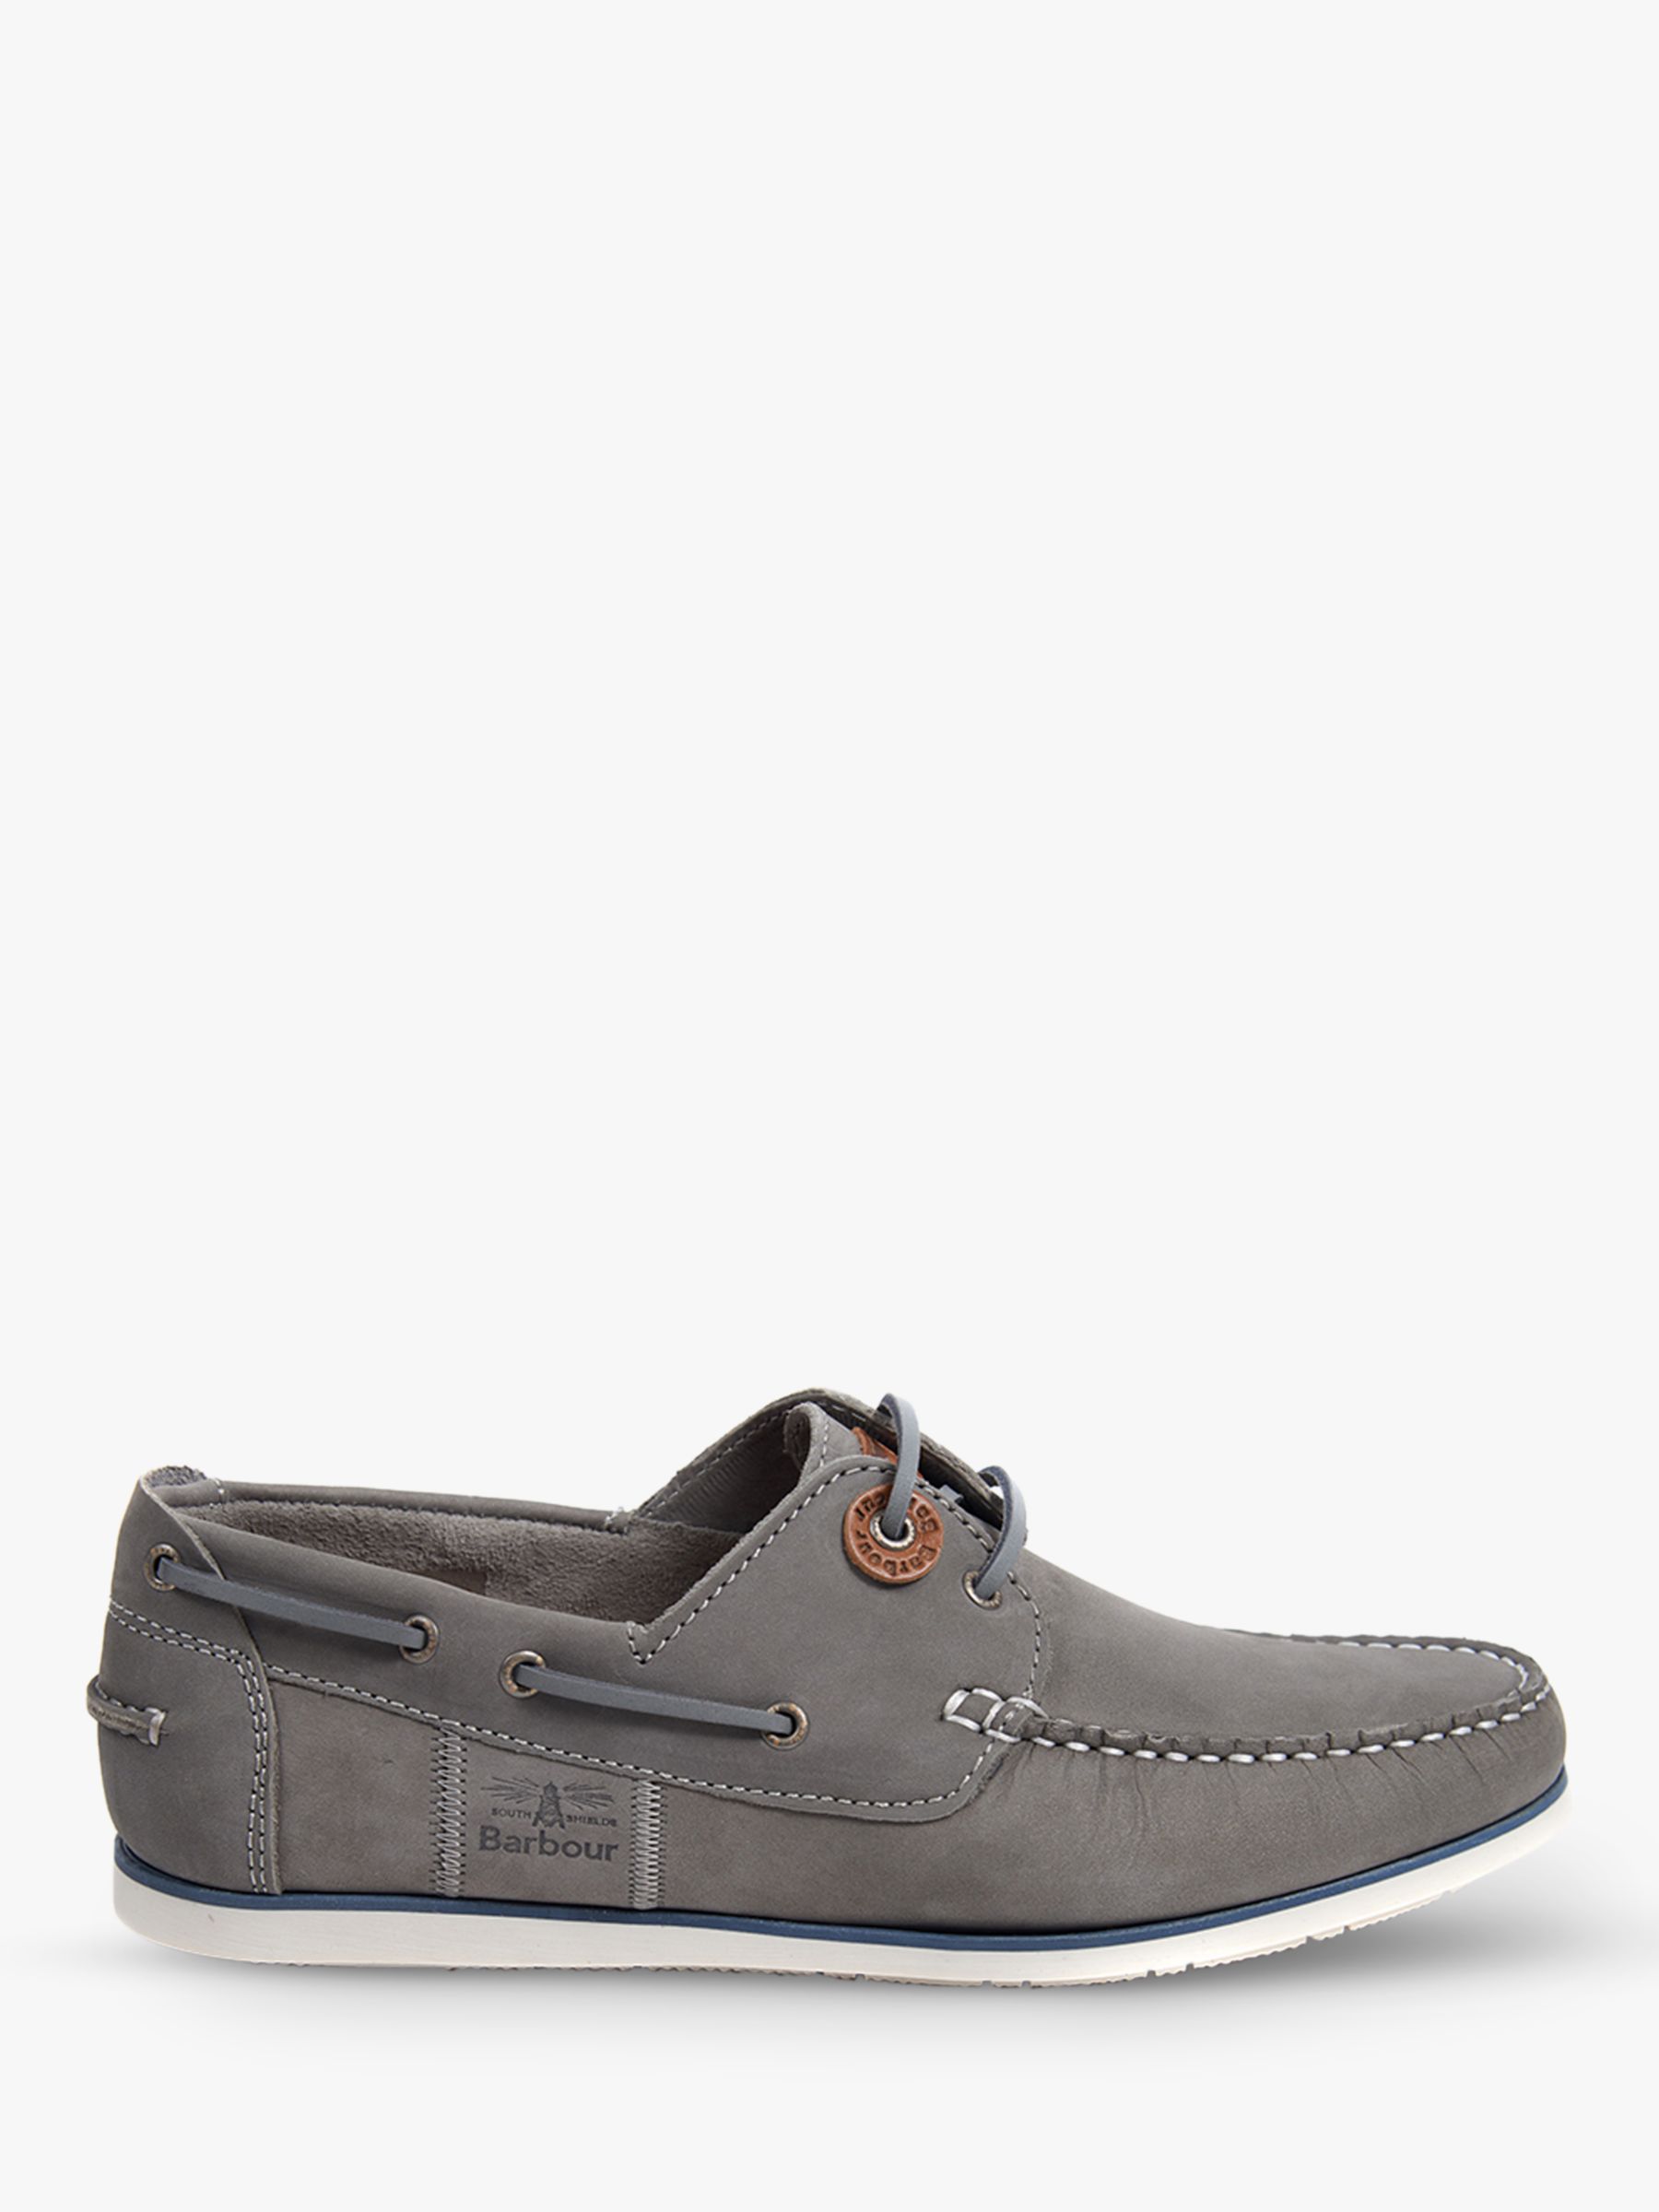 light grey boat shoes